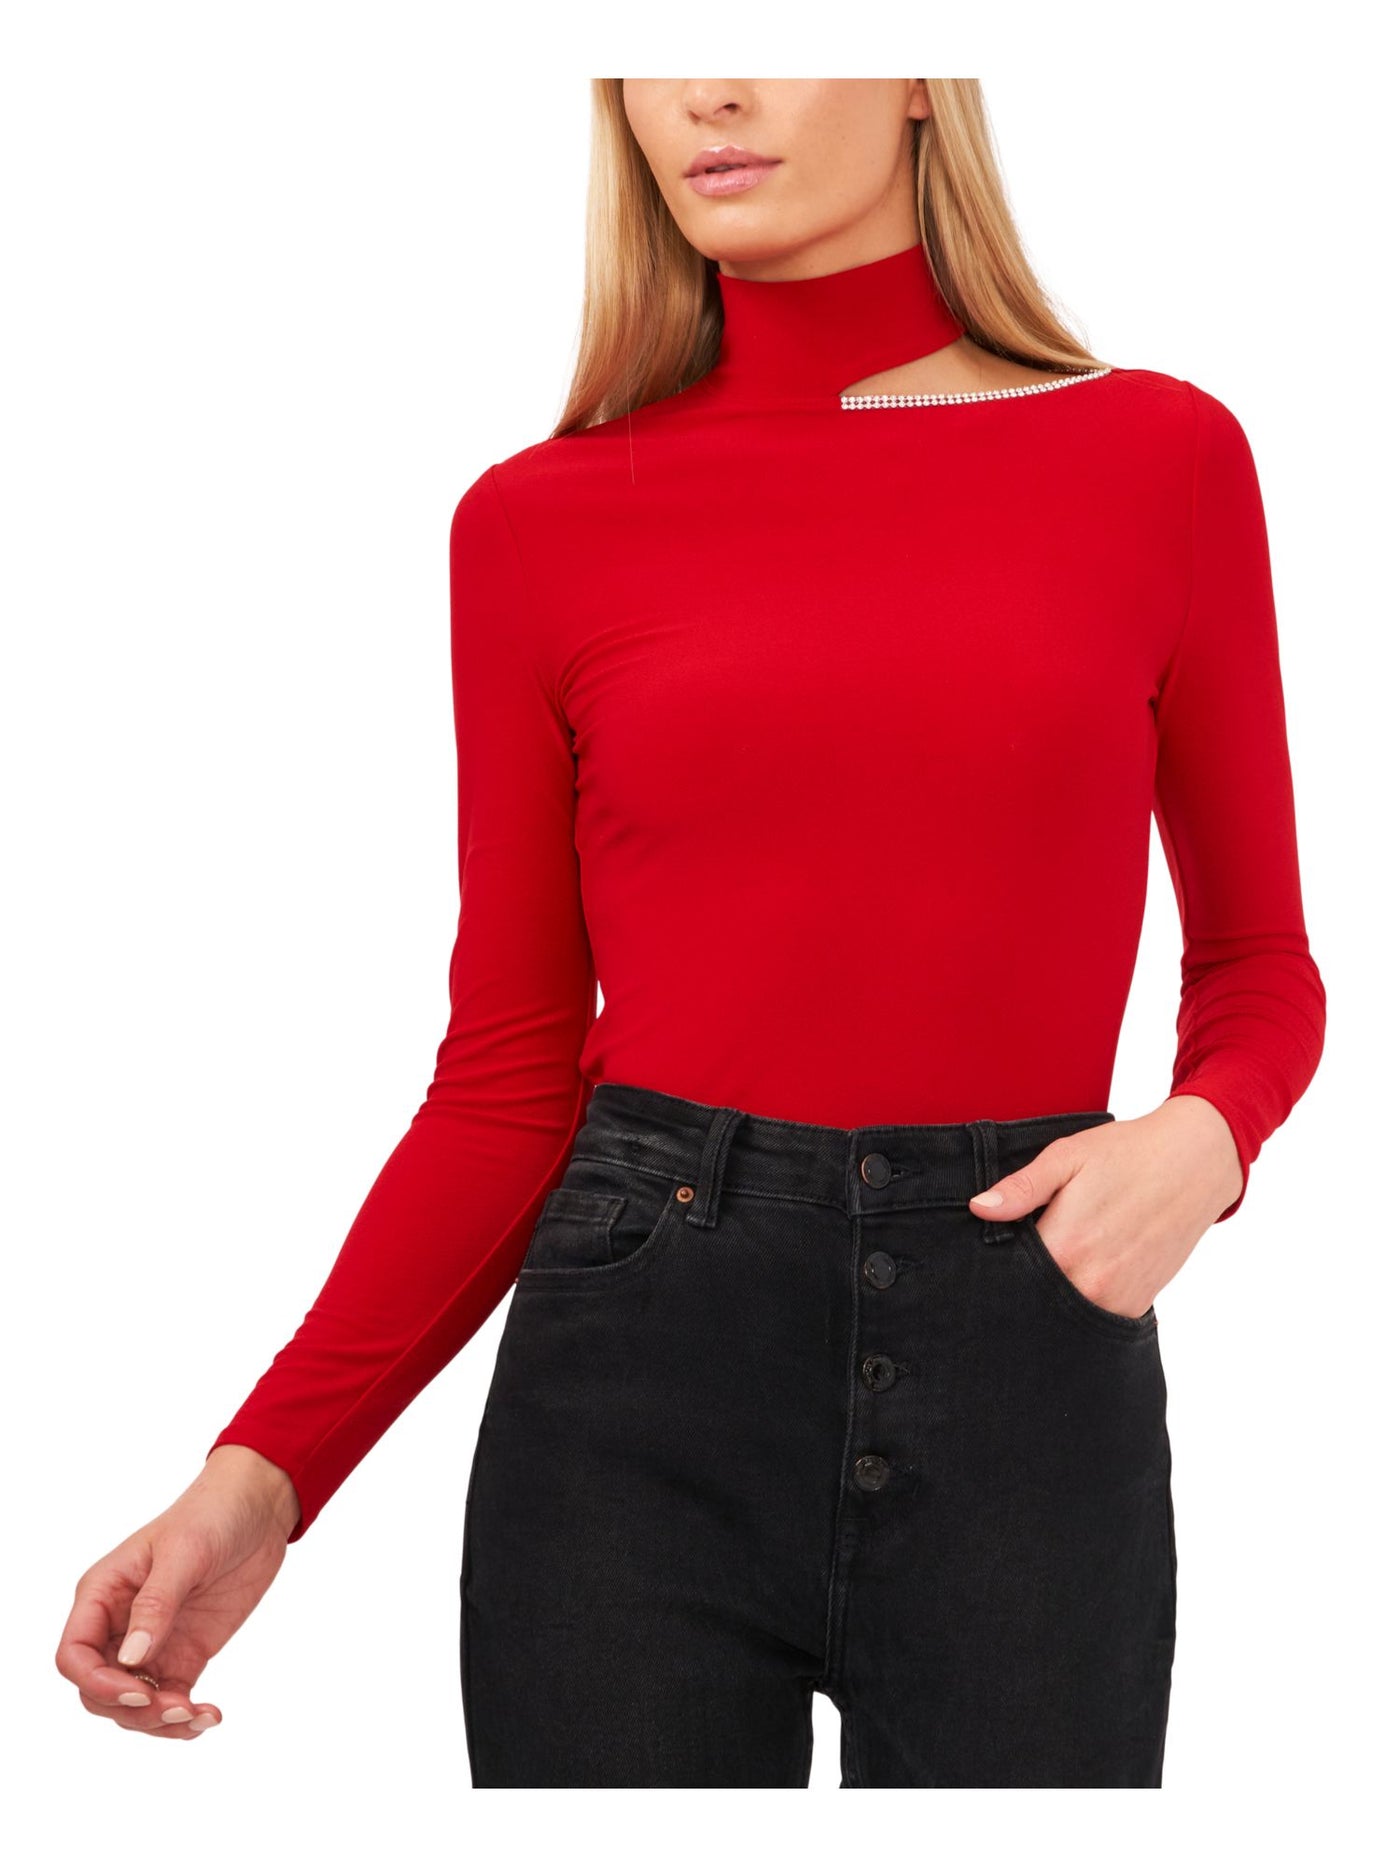 28TH & PARK Womens Red Cut Out Rhinestone Fitted Long Sleeve Mock Neck Top Juniors XS